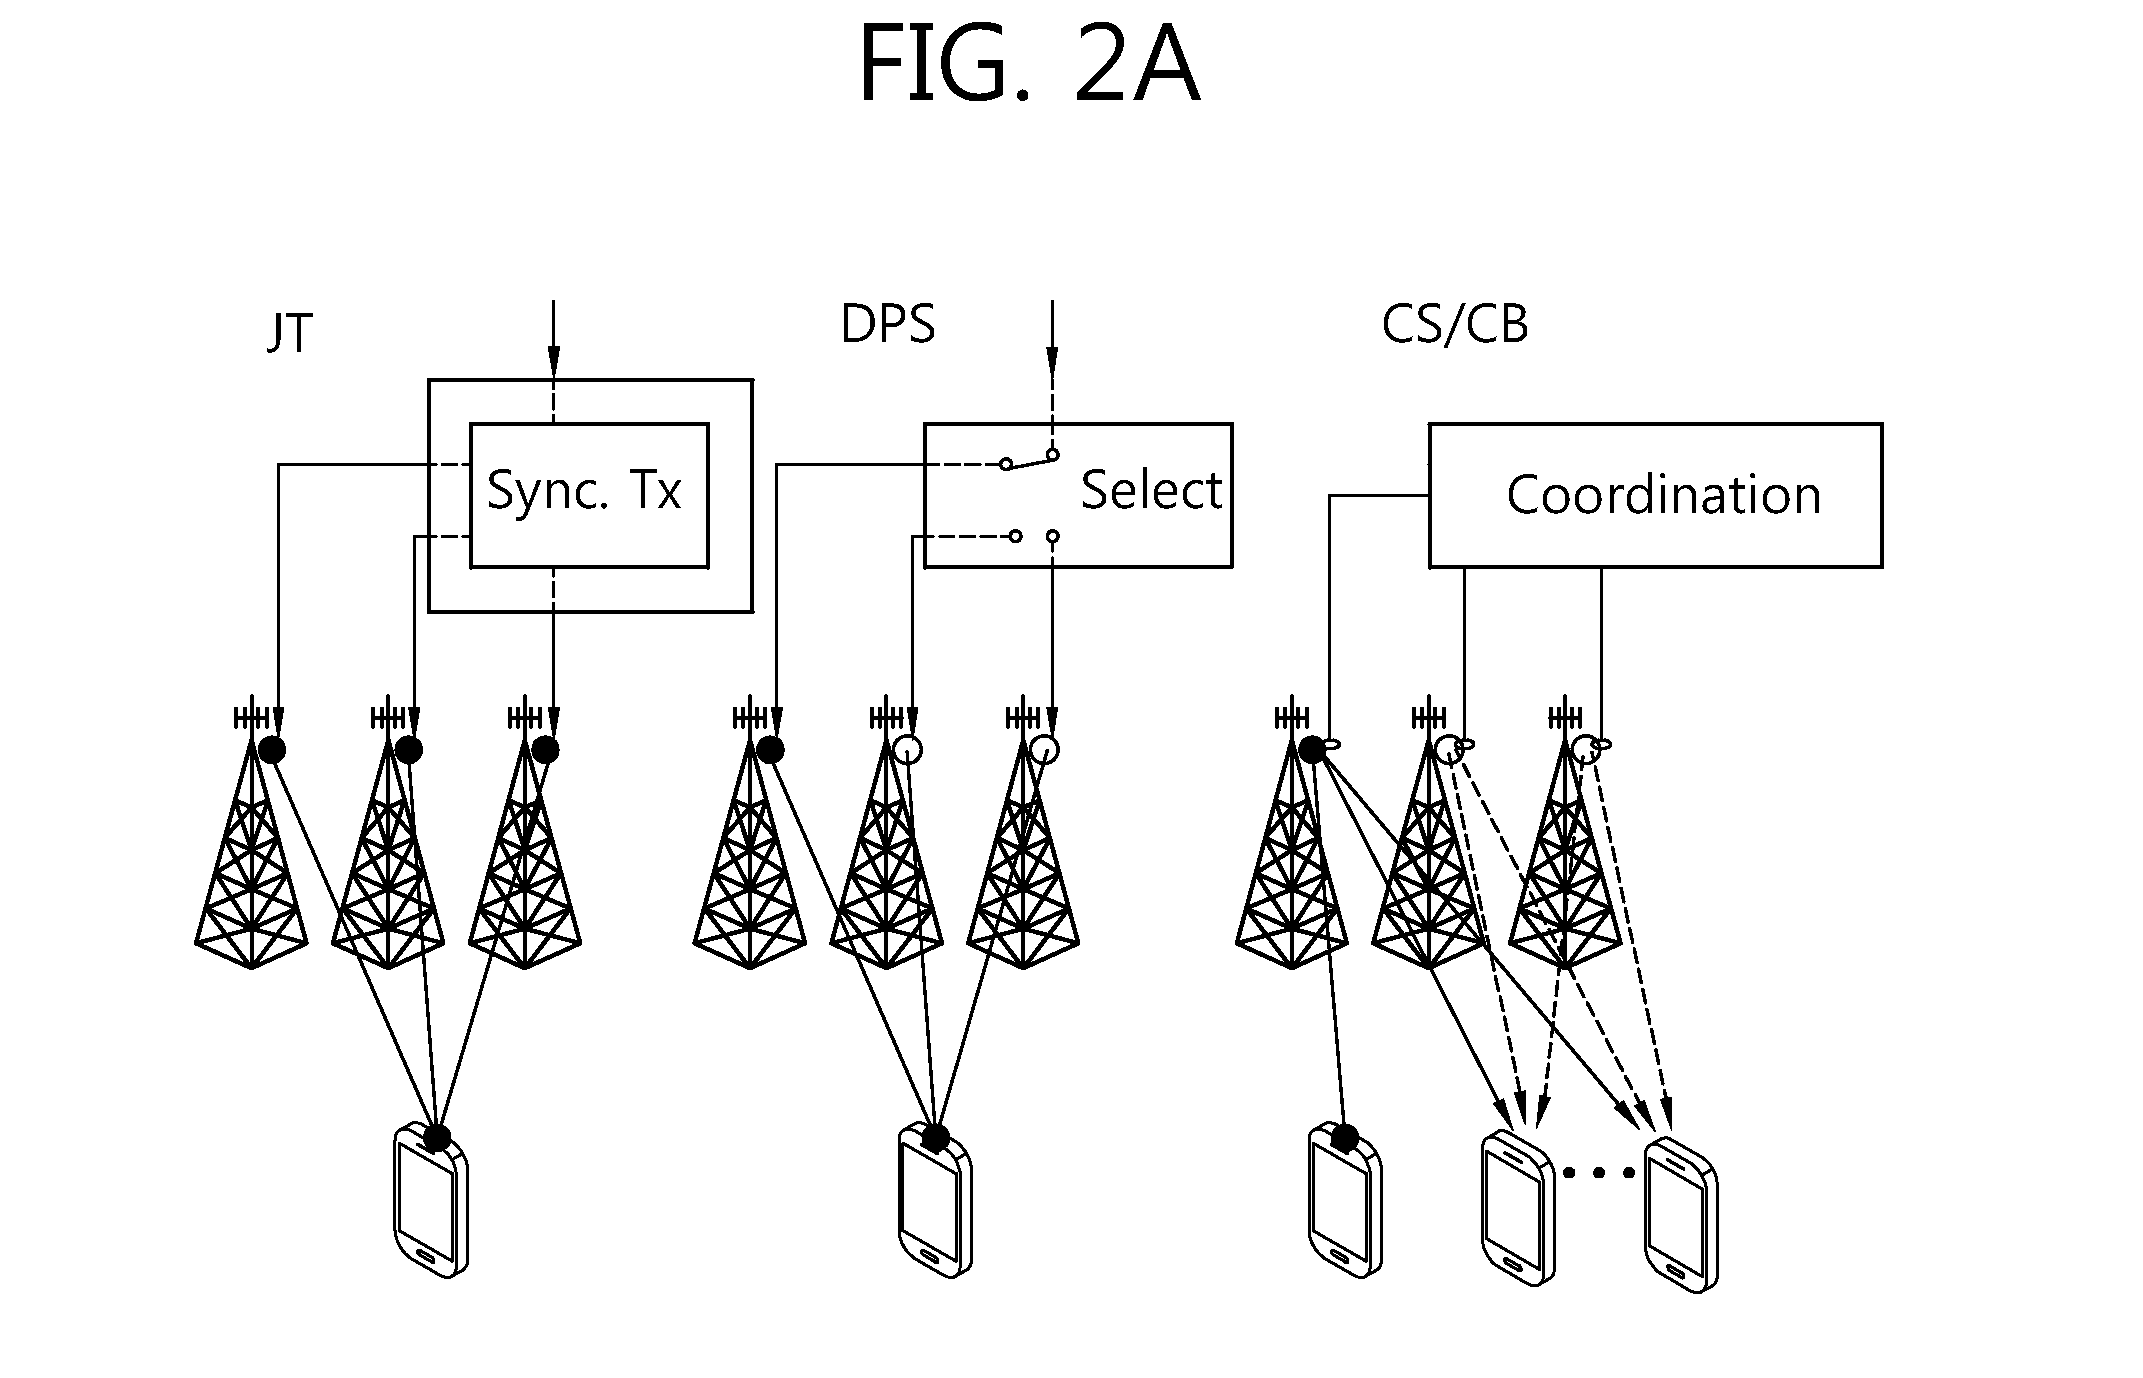 Coordinated multi-point transmission and reception method in overlaid cell environment